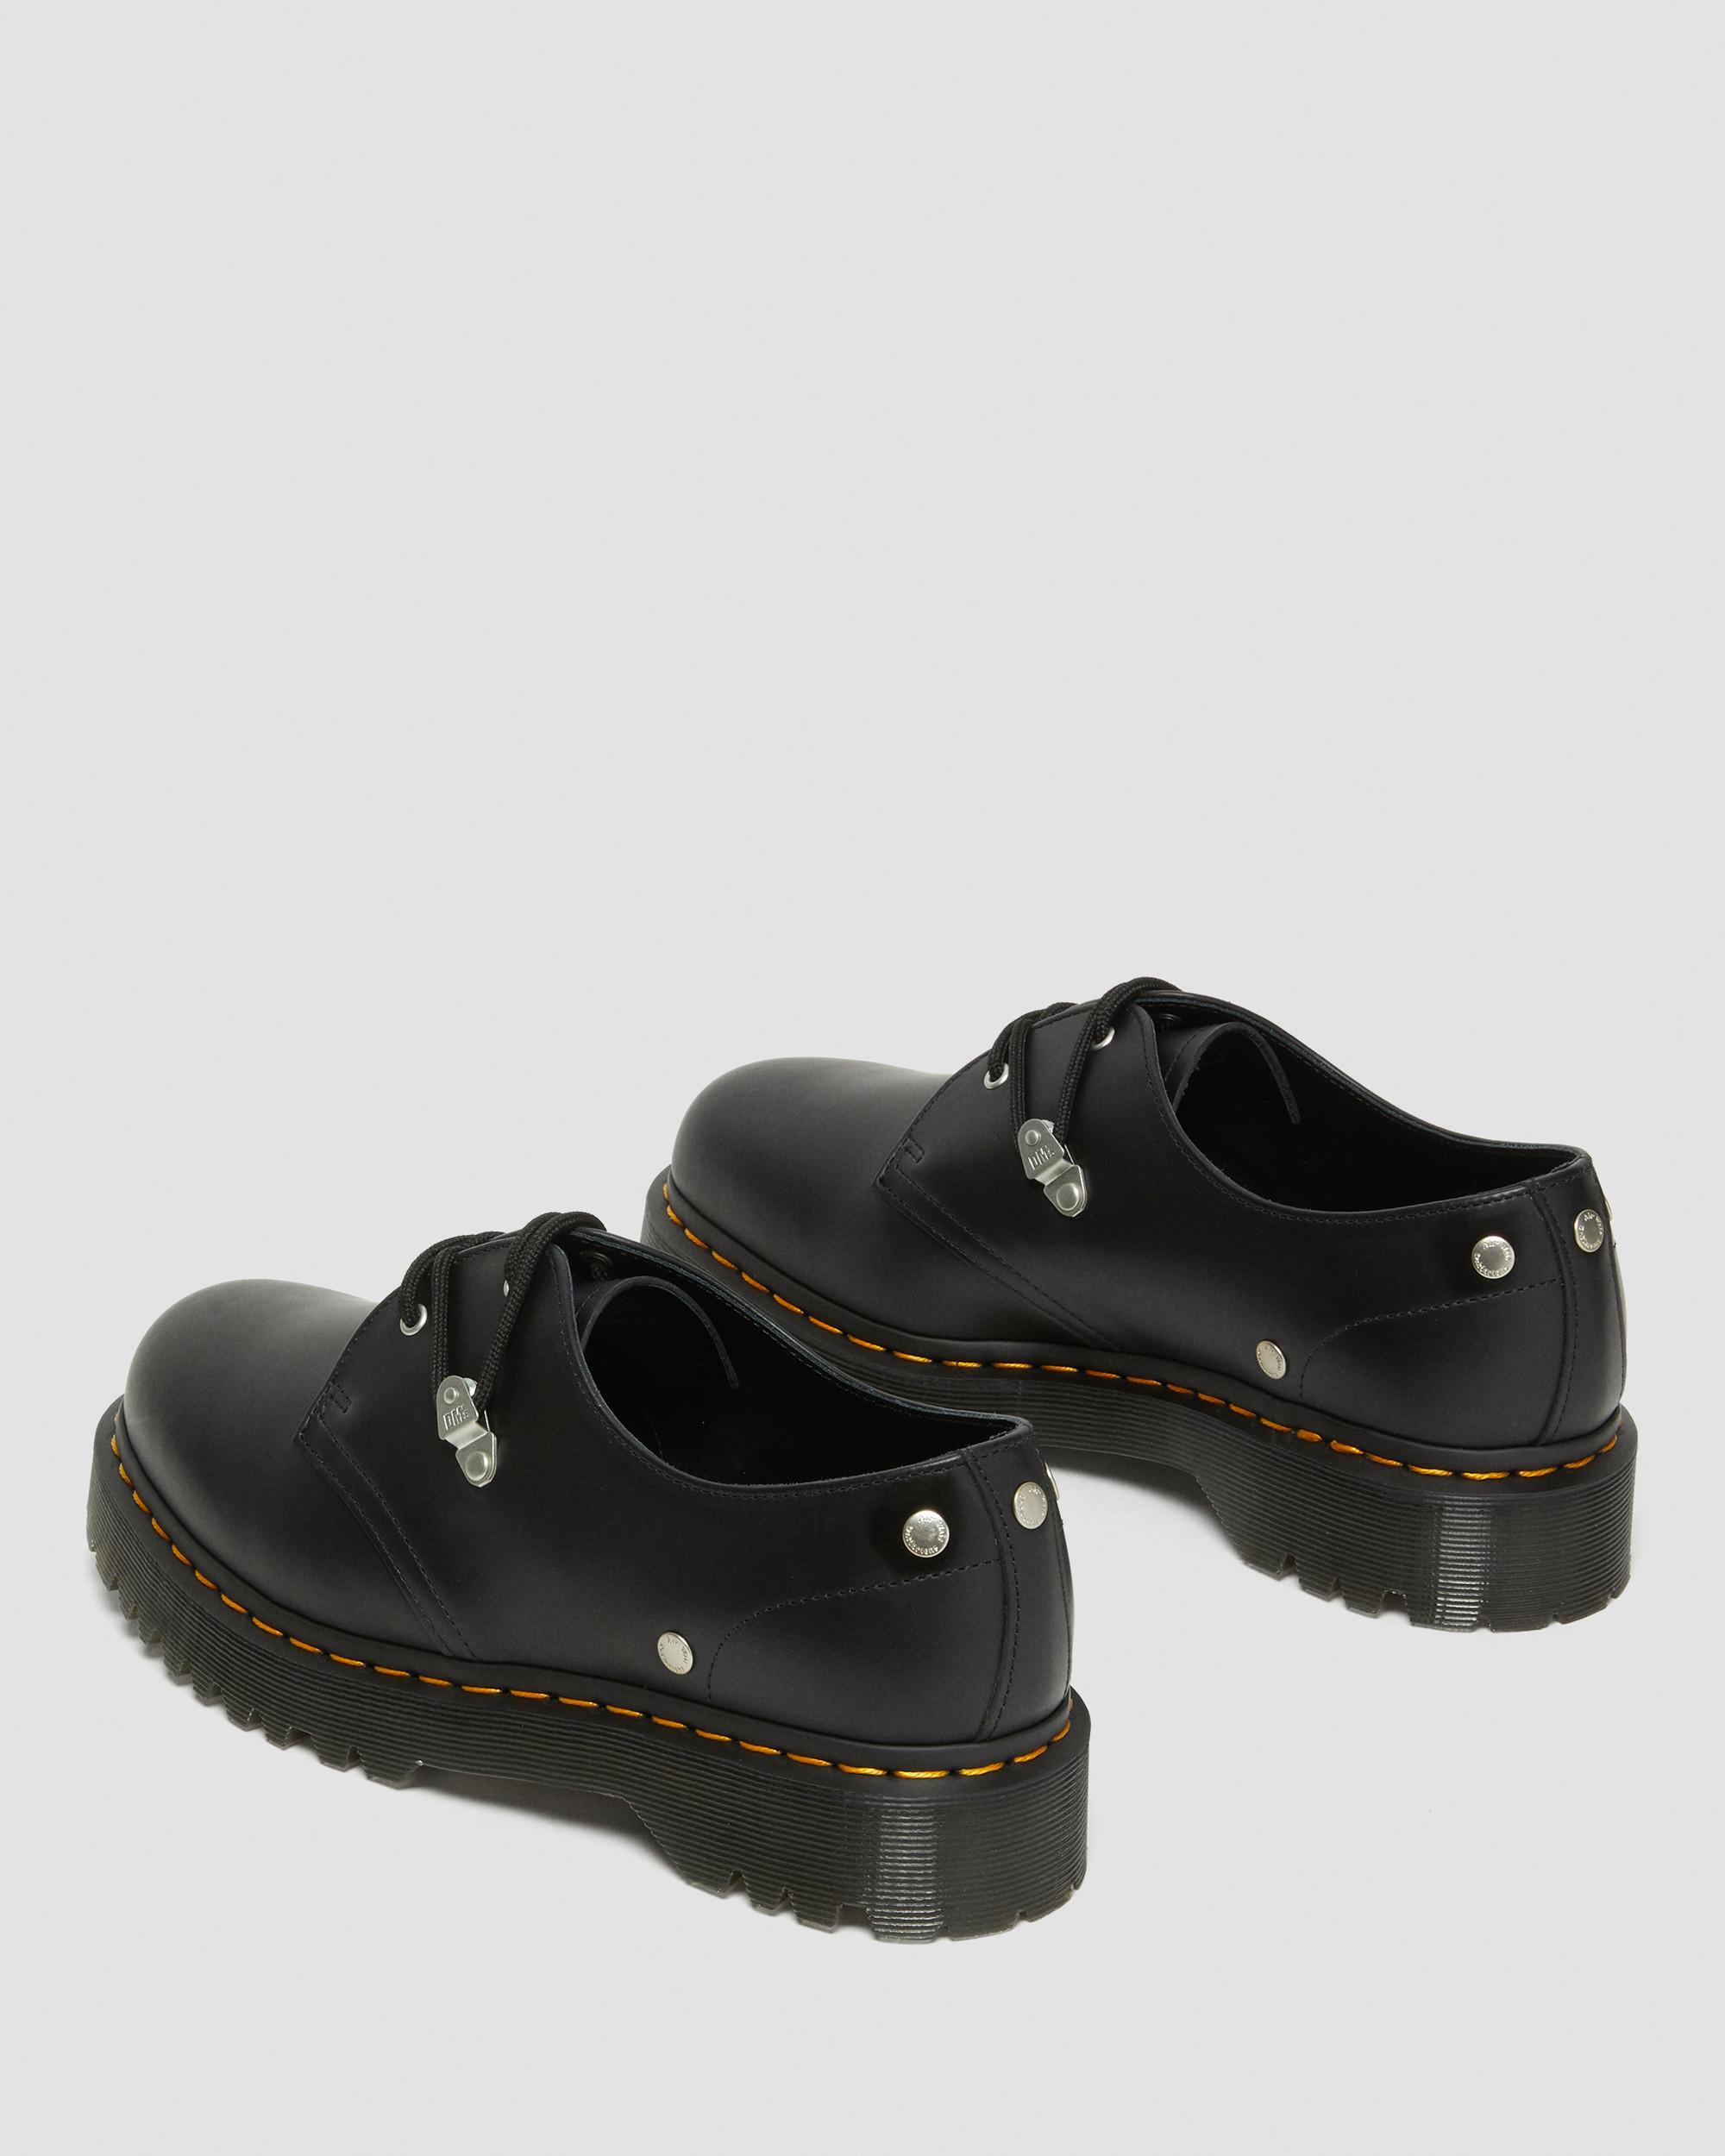 1461 Bex Stud Leather Oxford Shoes in Black | Dr. Martens